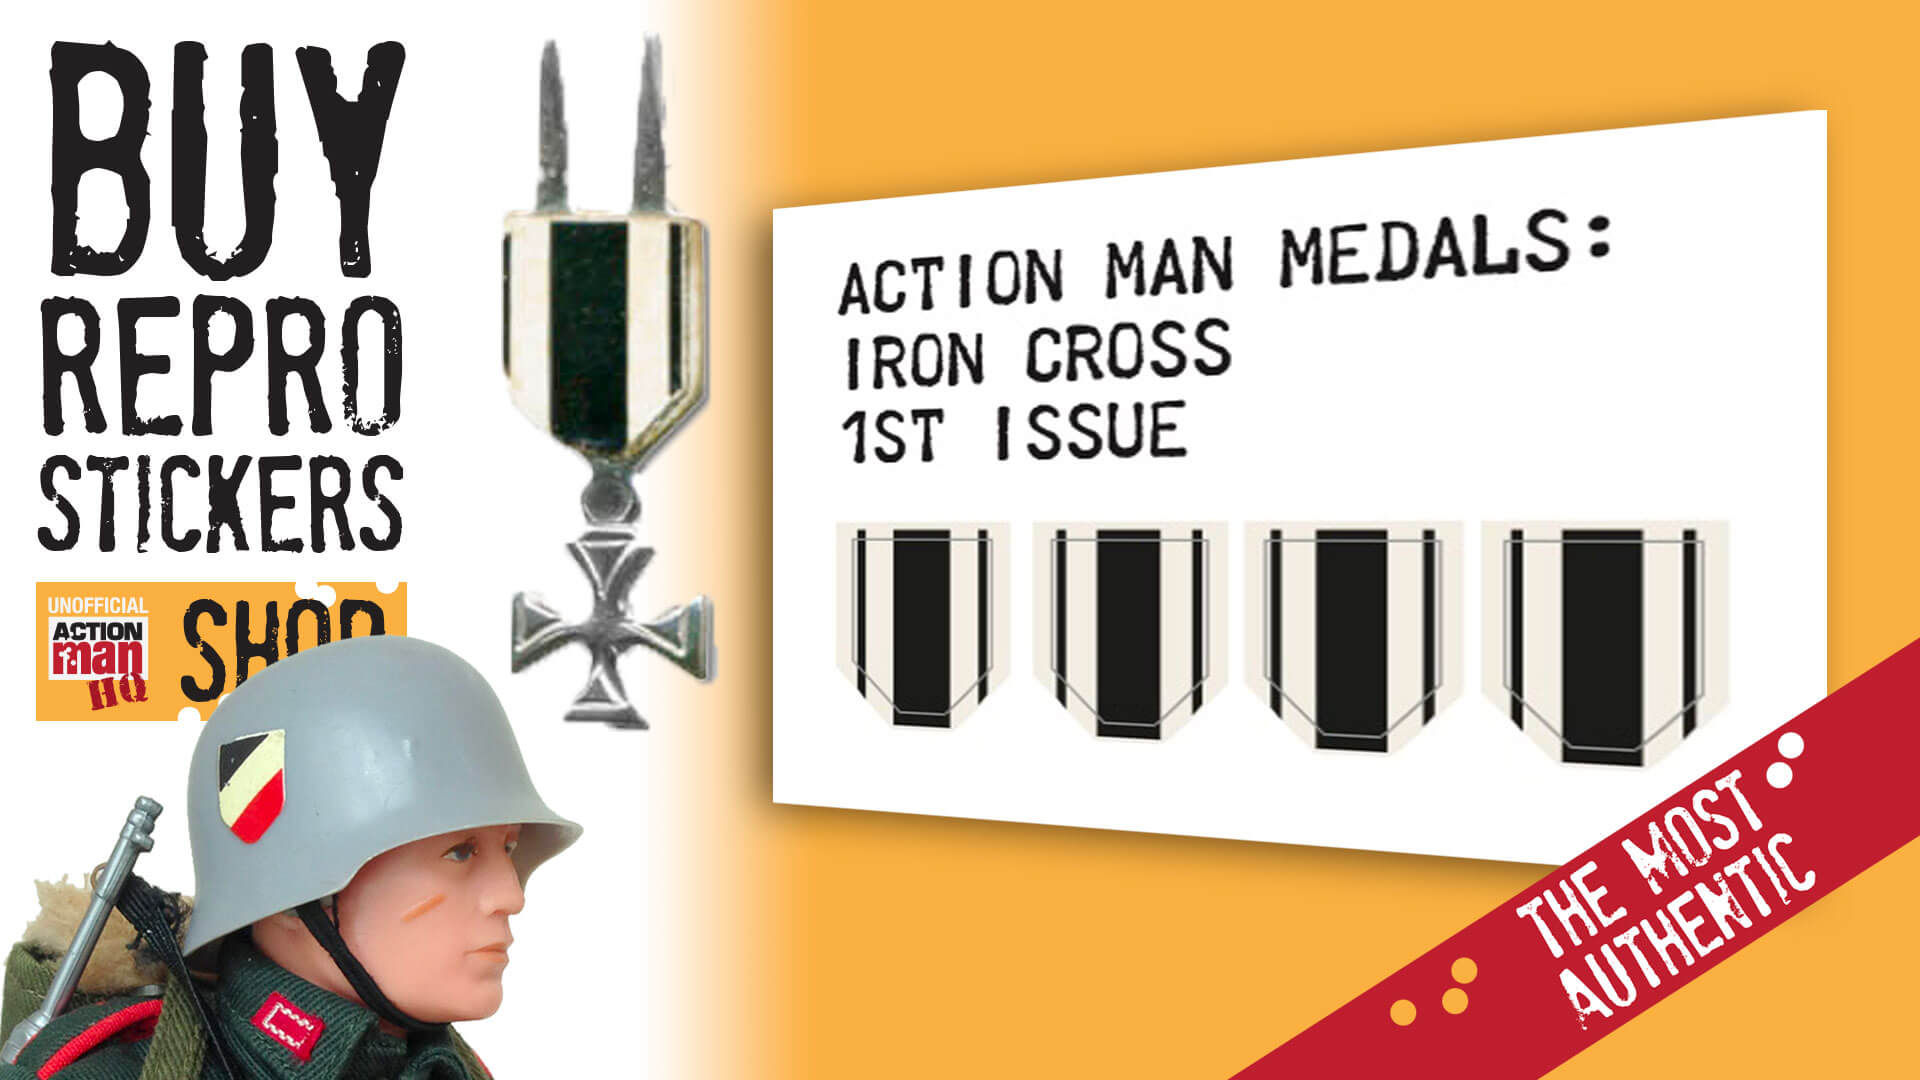 Action Man Medal Stickers